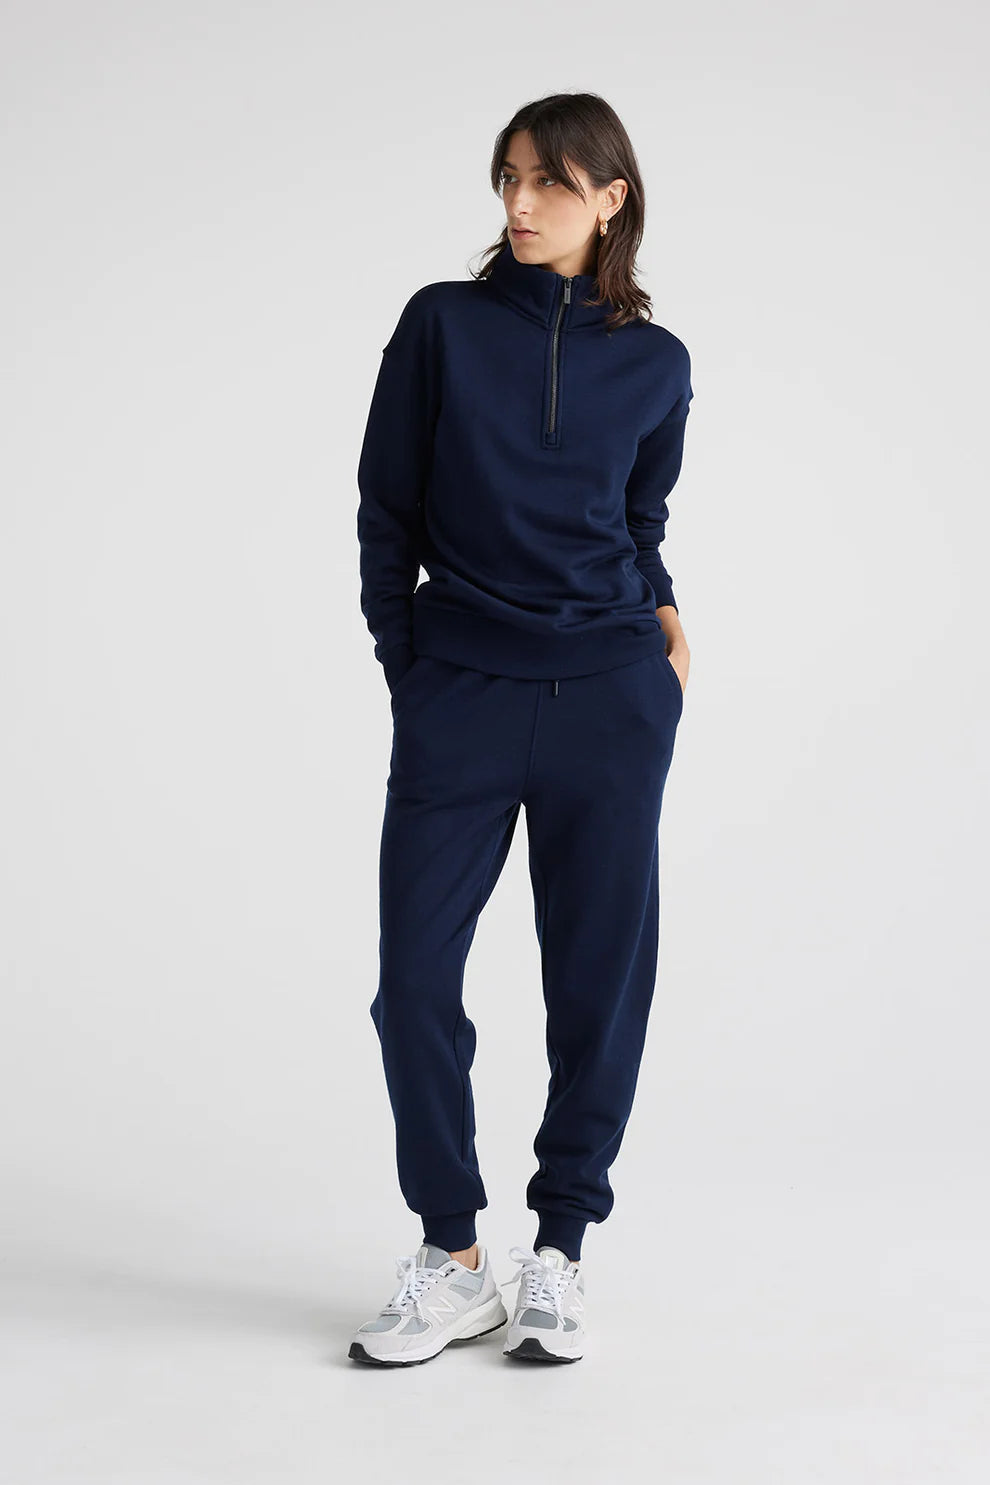 "Stay cozy in style with our navy blue Merino wool zip collar sweater. Luxurious comfort meets timeless sophistication."